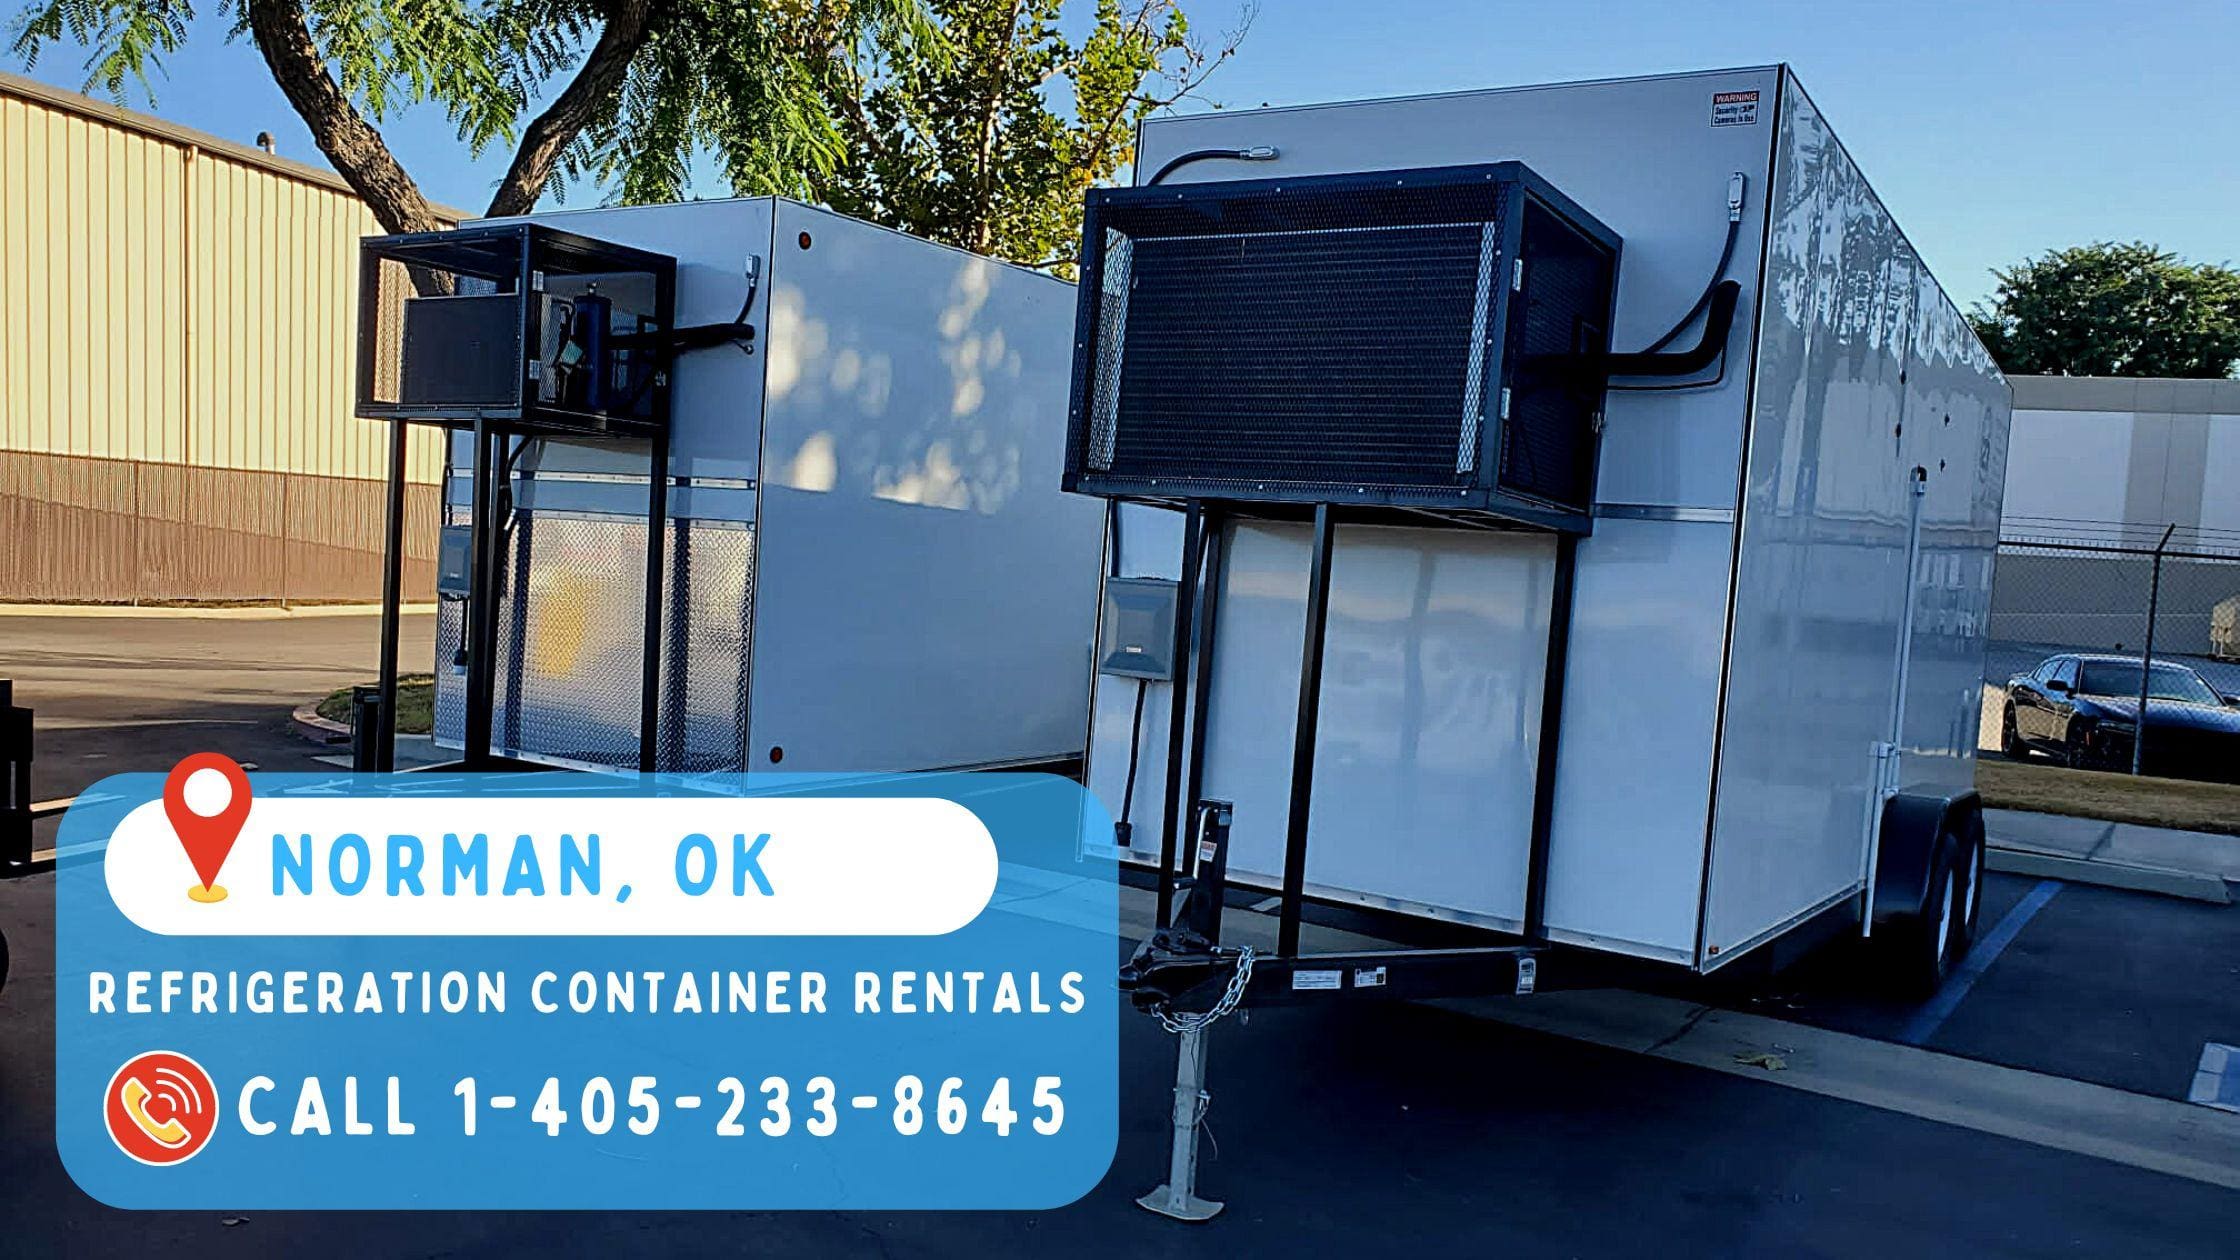 Refrigeration Container Rentals in Norman, OK